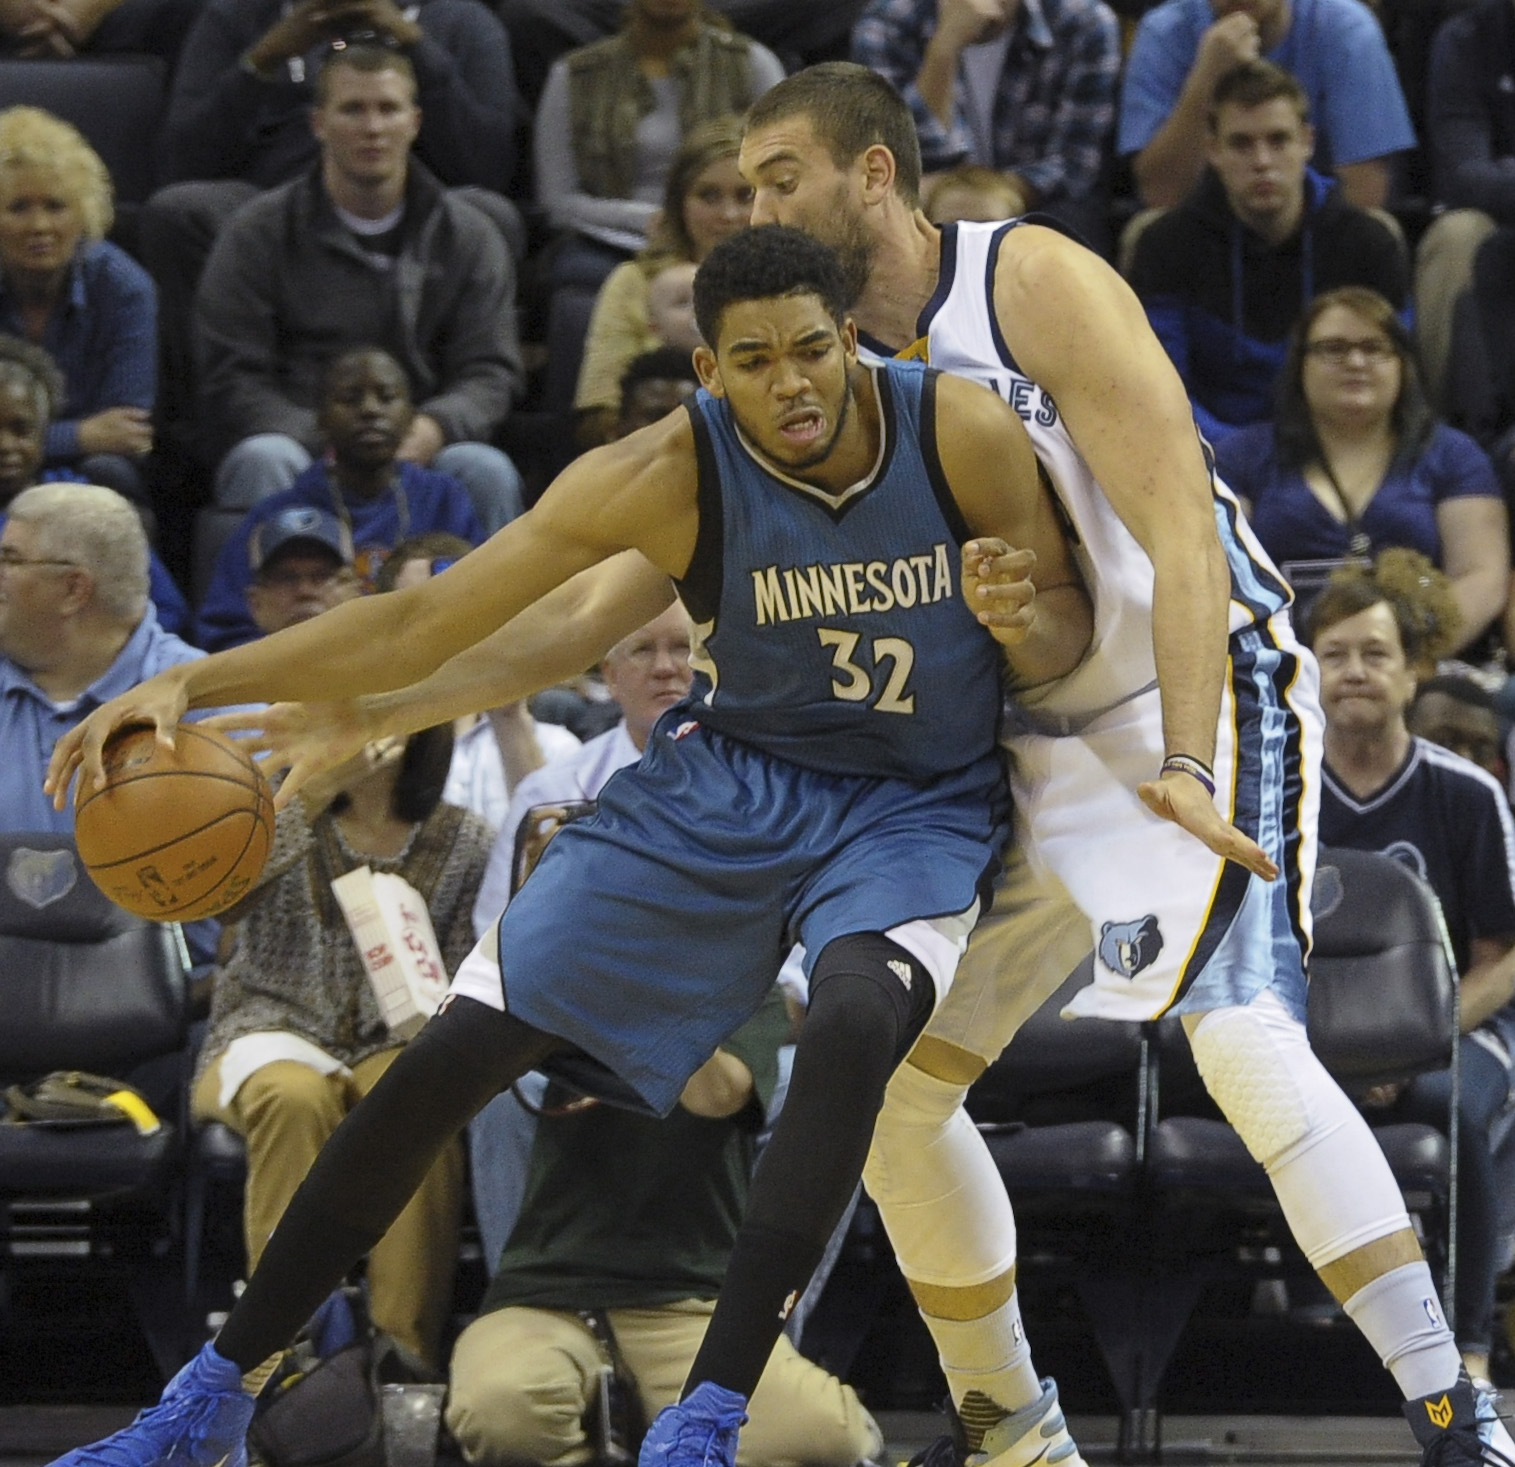 Oct 18, 2015; Memphis, TN, USA; Minnesota Timberwolves center Karl-Anthony Towns (32) handles the ball against Memphis Grizzlies center Marc Gasol (33) during the game at FedExForum. Mandatory Credit: Justin Ford-USA TODAY Sports